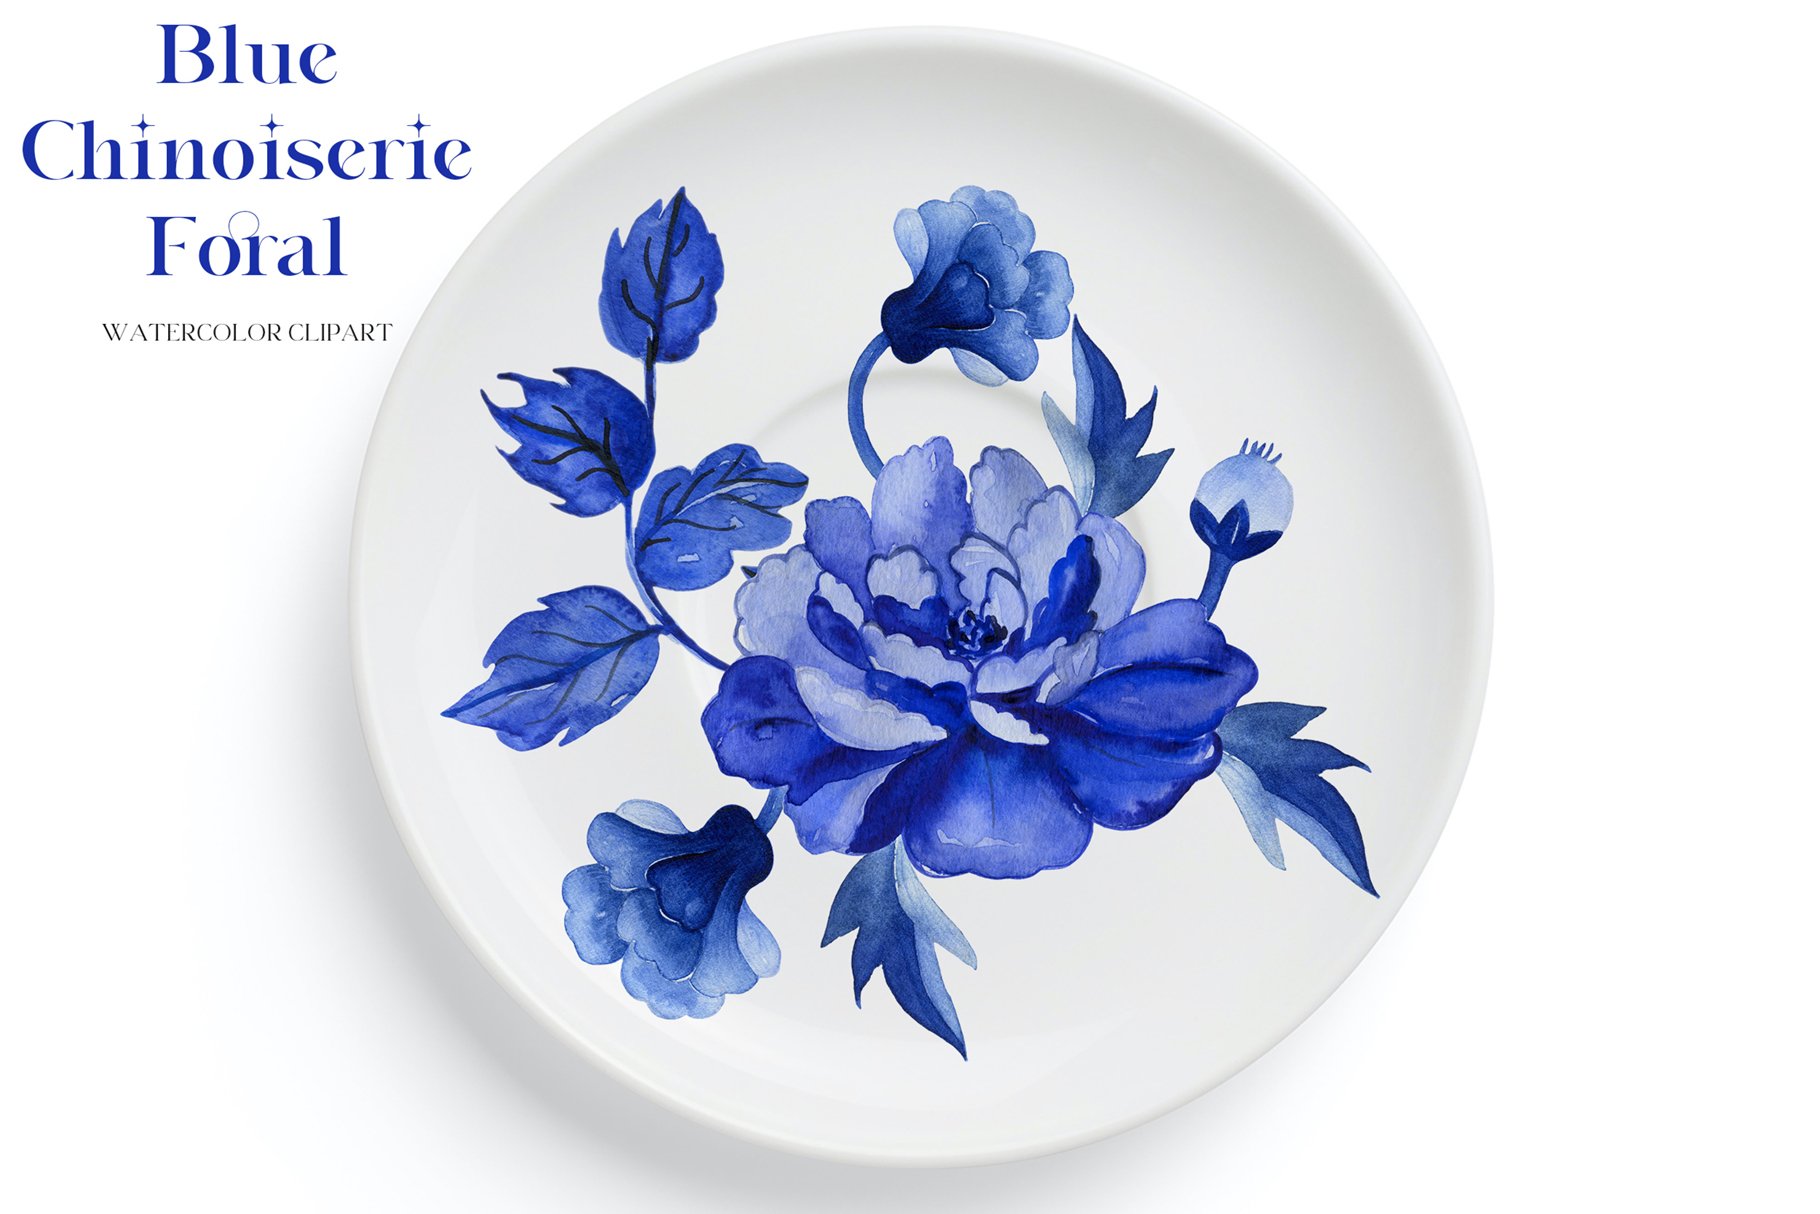 Blue Chinoiserie Floral